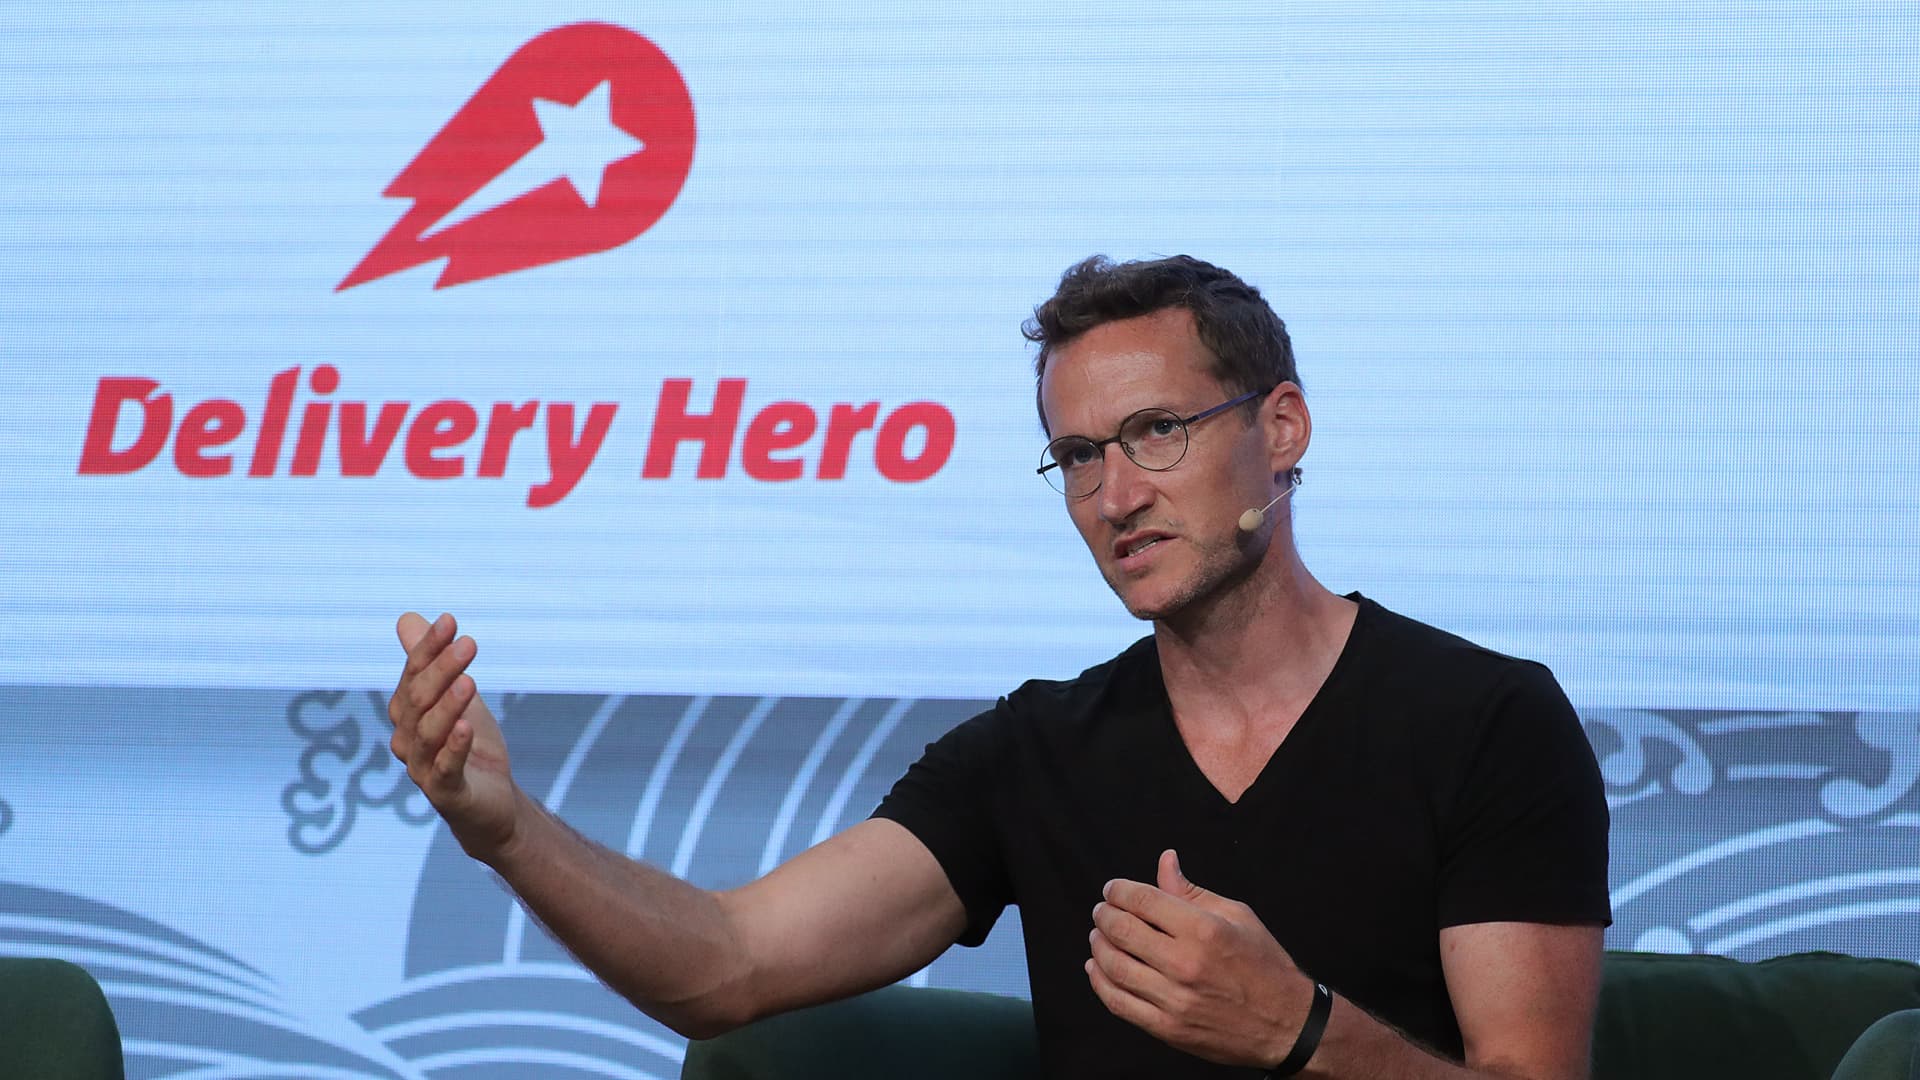 Delivery Hero slides, extending losses from last week, as early results fail to calm investors